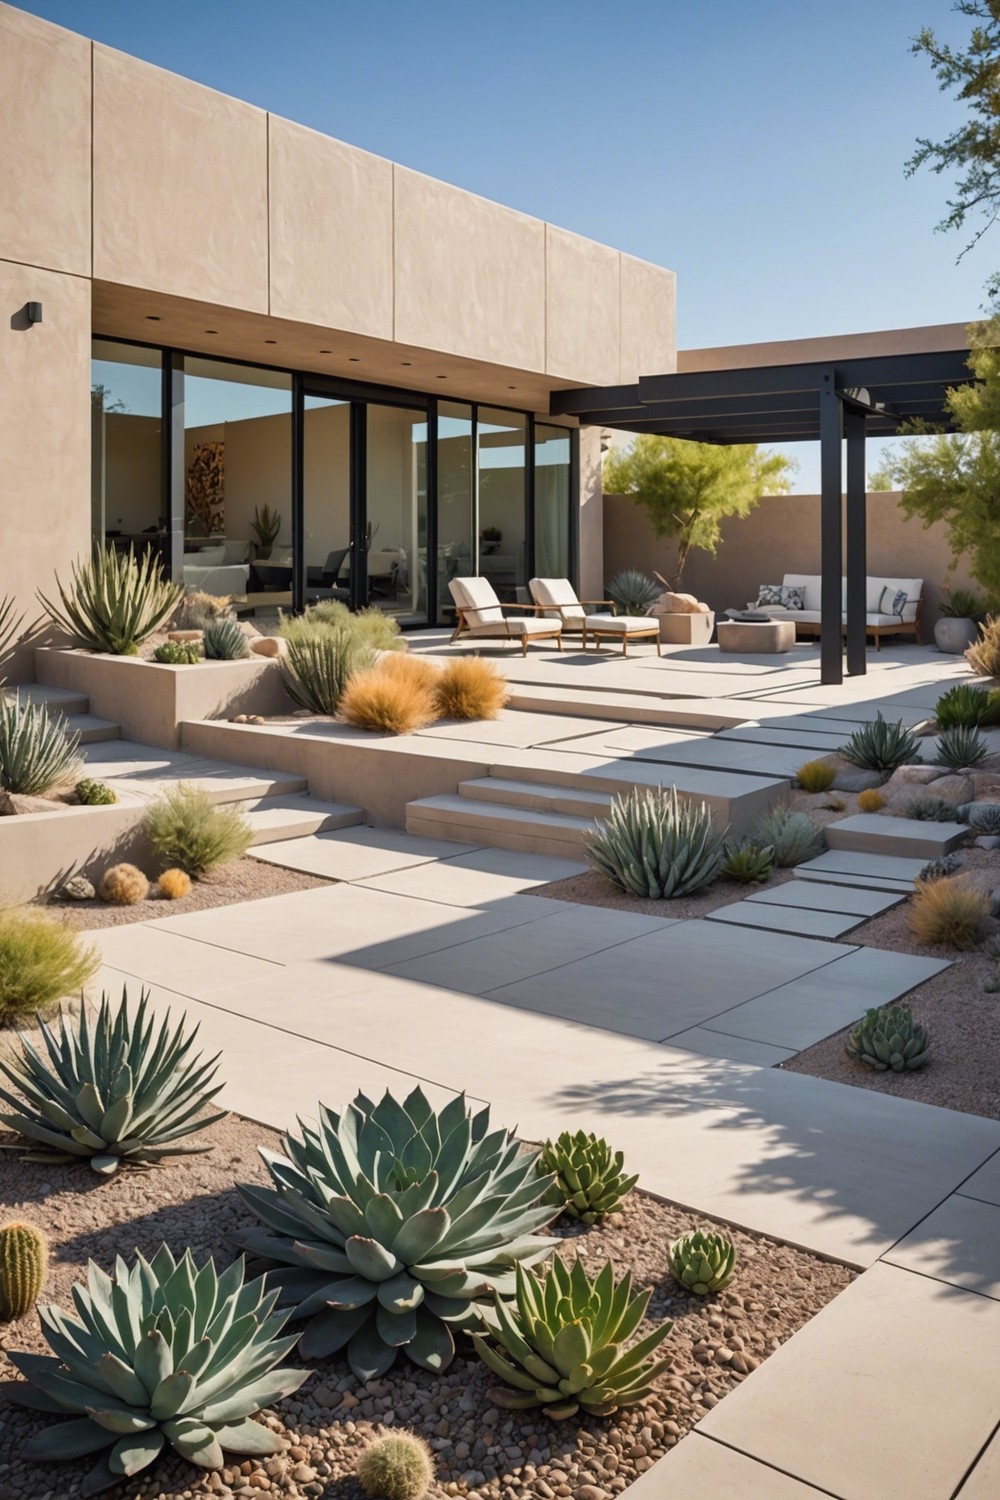 Modern Desert Landscaping with Sleek Lines and Shapes